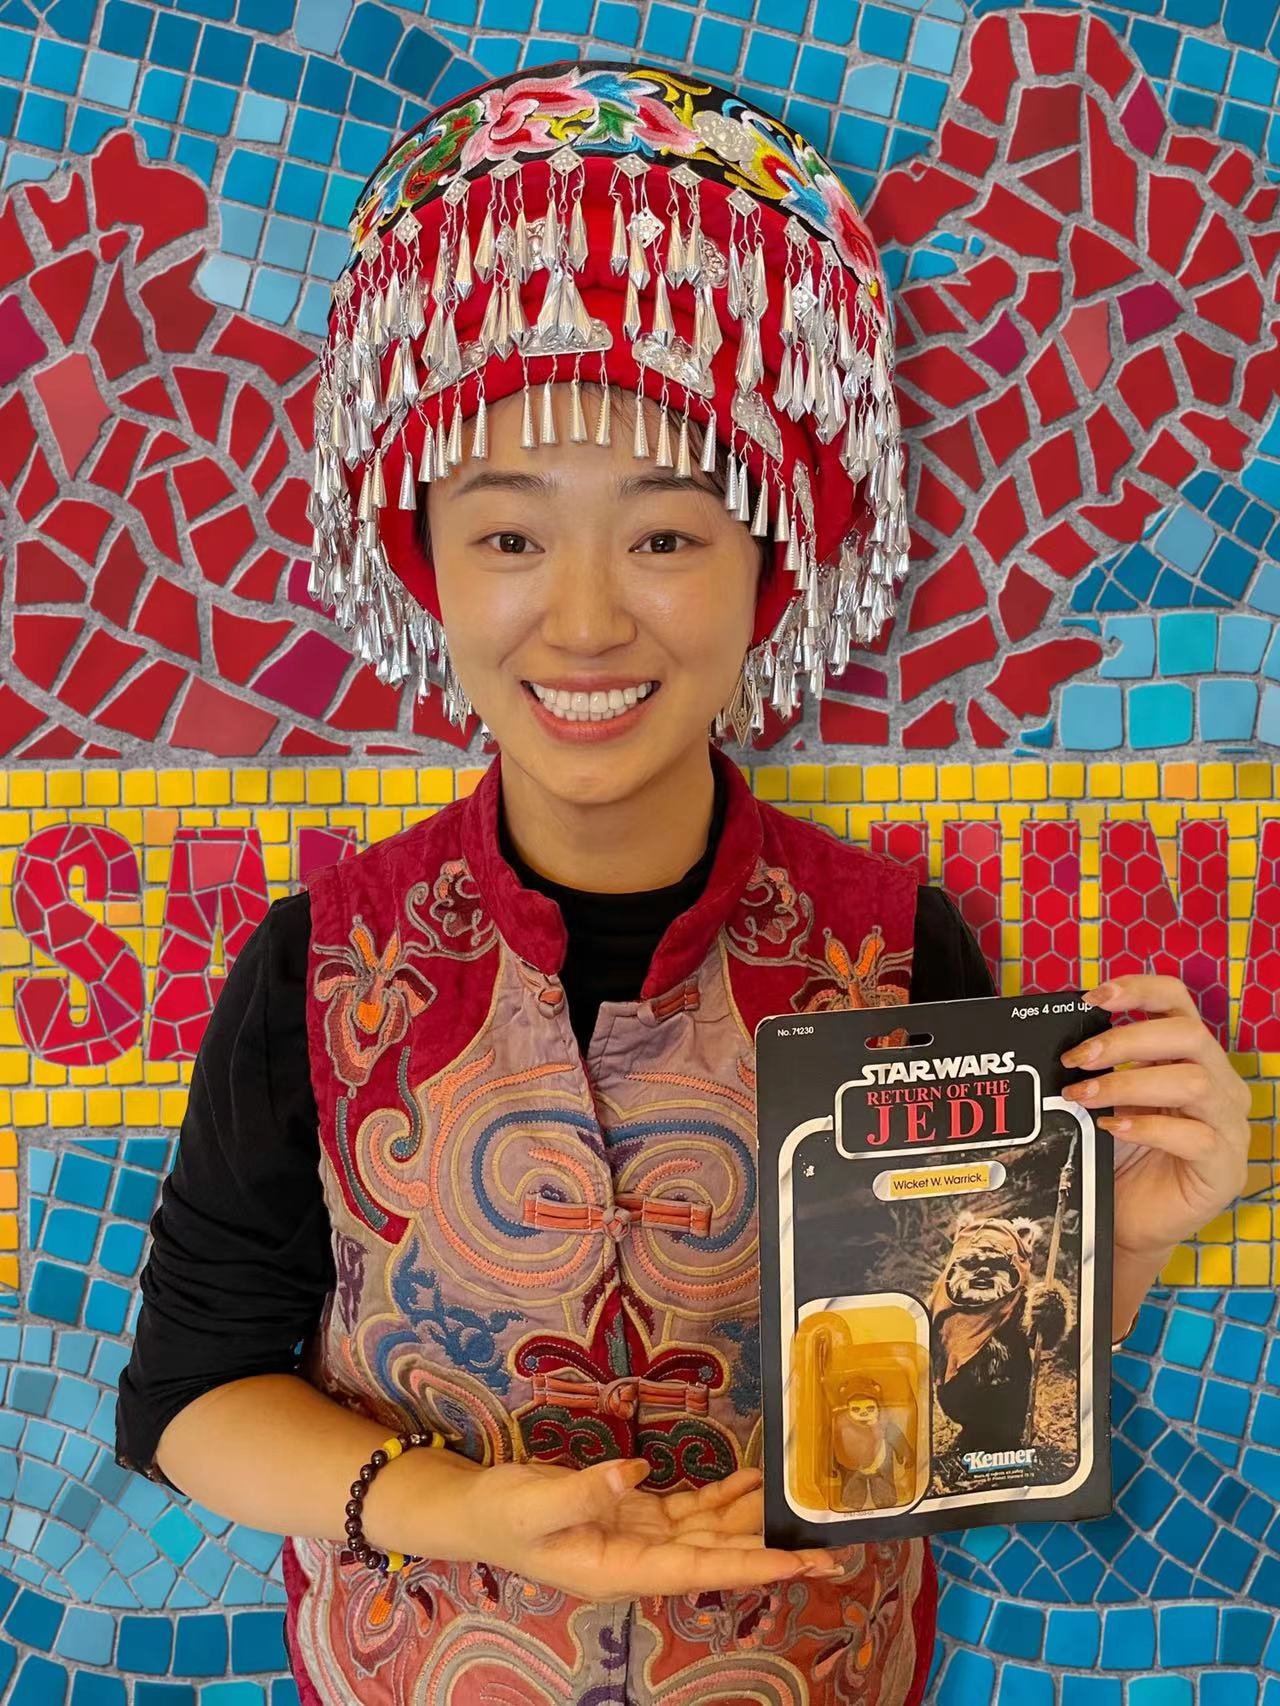 Ashley Huang’s two objects: A figurine of Wicket and a 土家 [Tǔjiā] headdress.